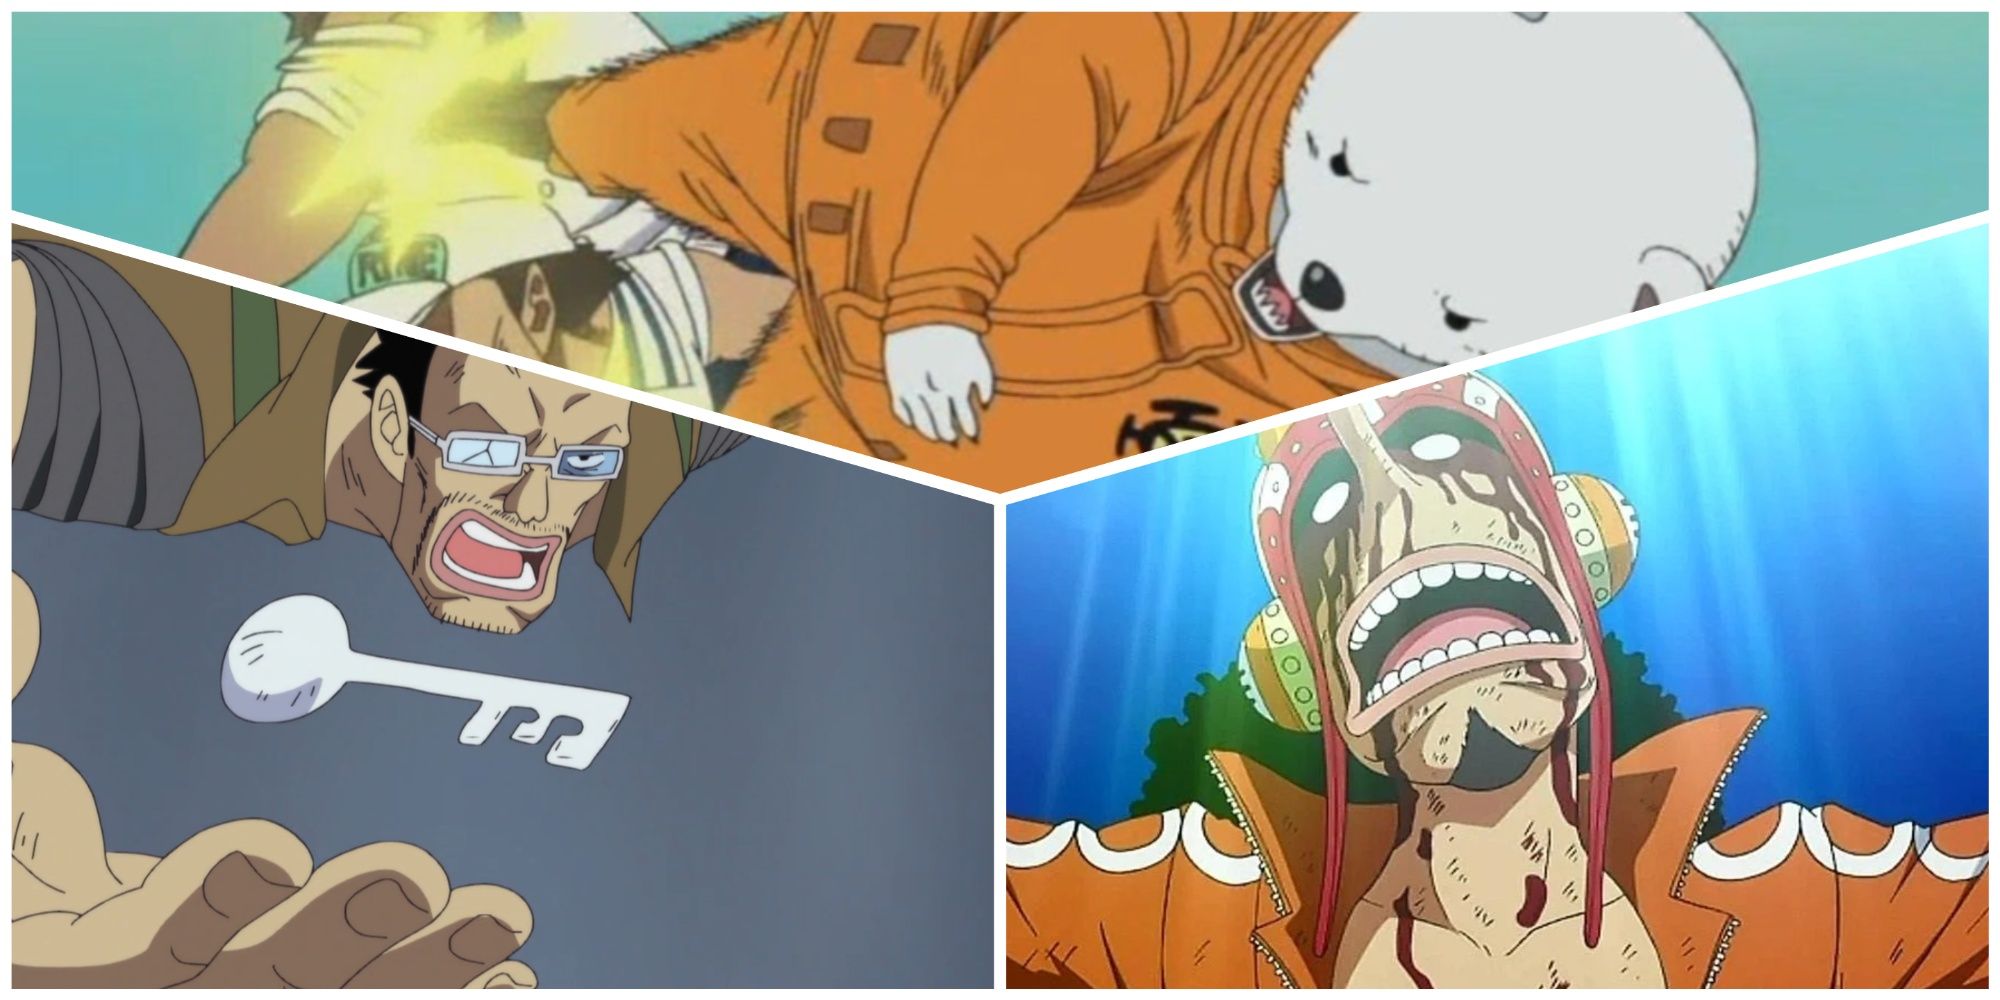 Top: Bepo kicking marines Bottom Left: Galdino forming a wax key Bottom Right: Usopp being held up by Harudjin in a christlike position